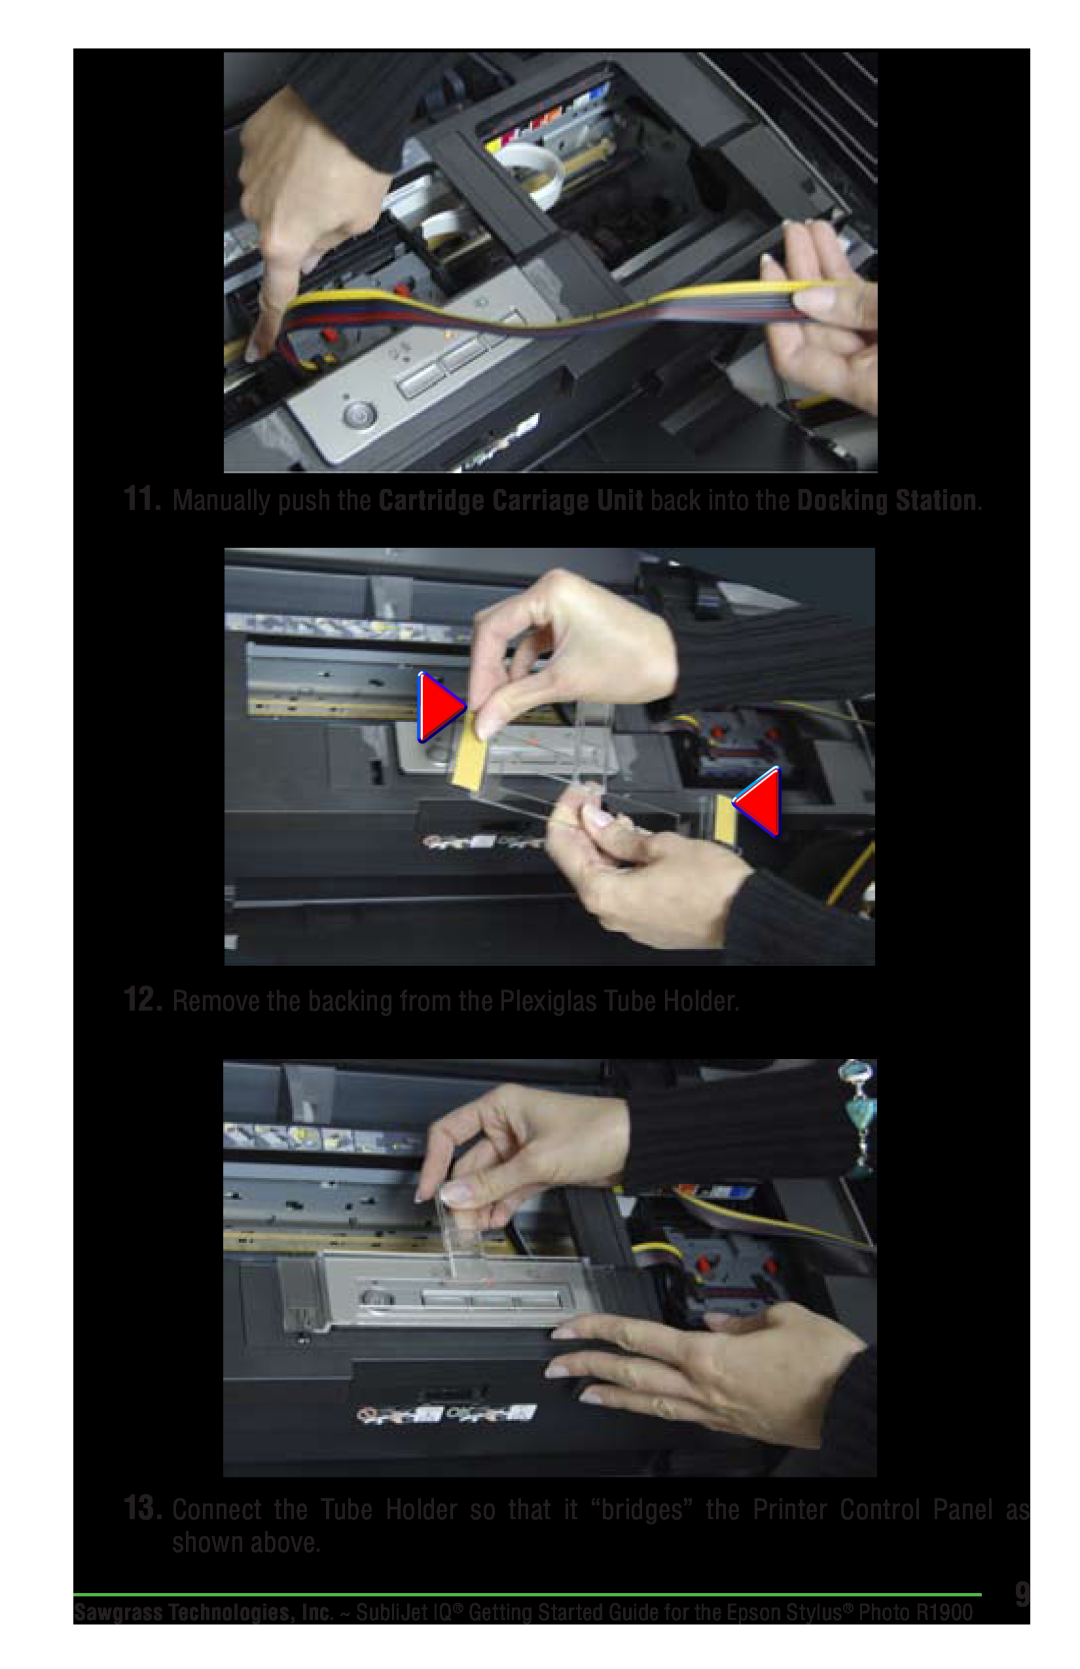 Epson R1900 manual Remove the backing from the Plexiglas Tube Holder 